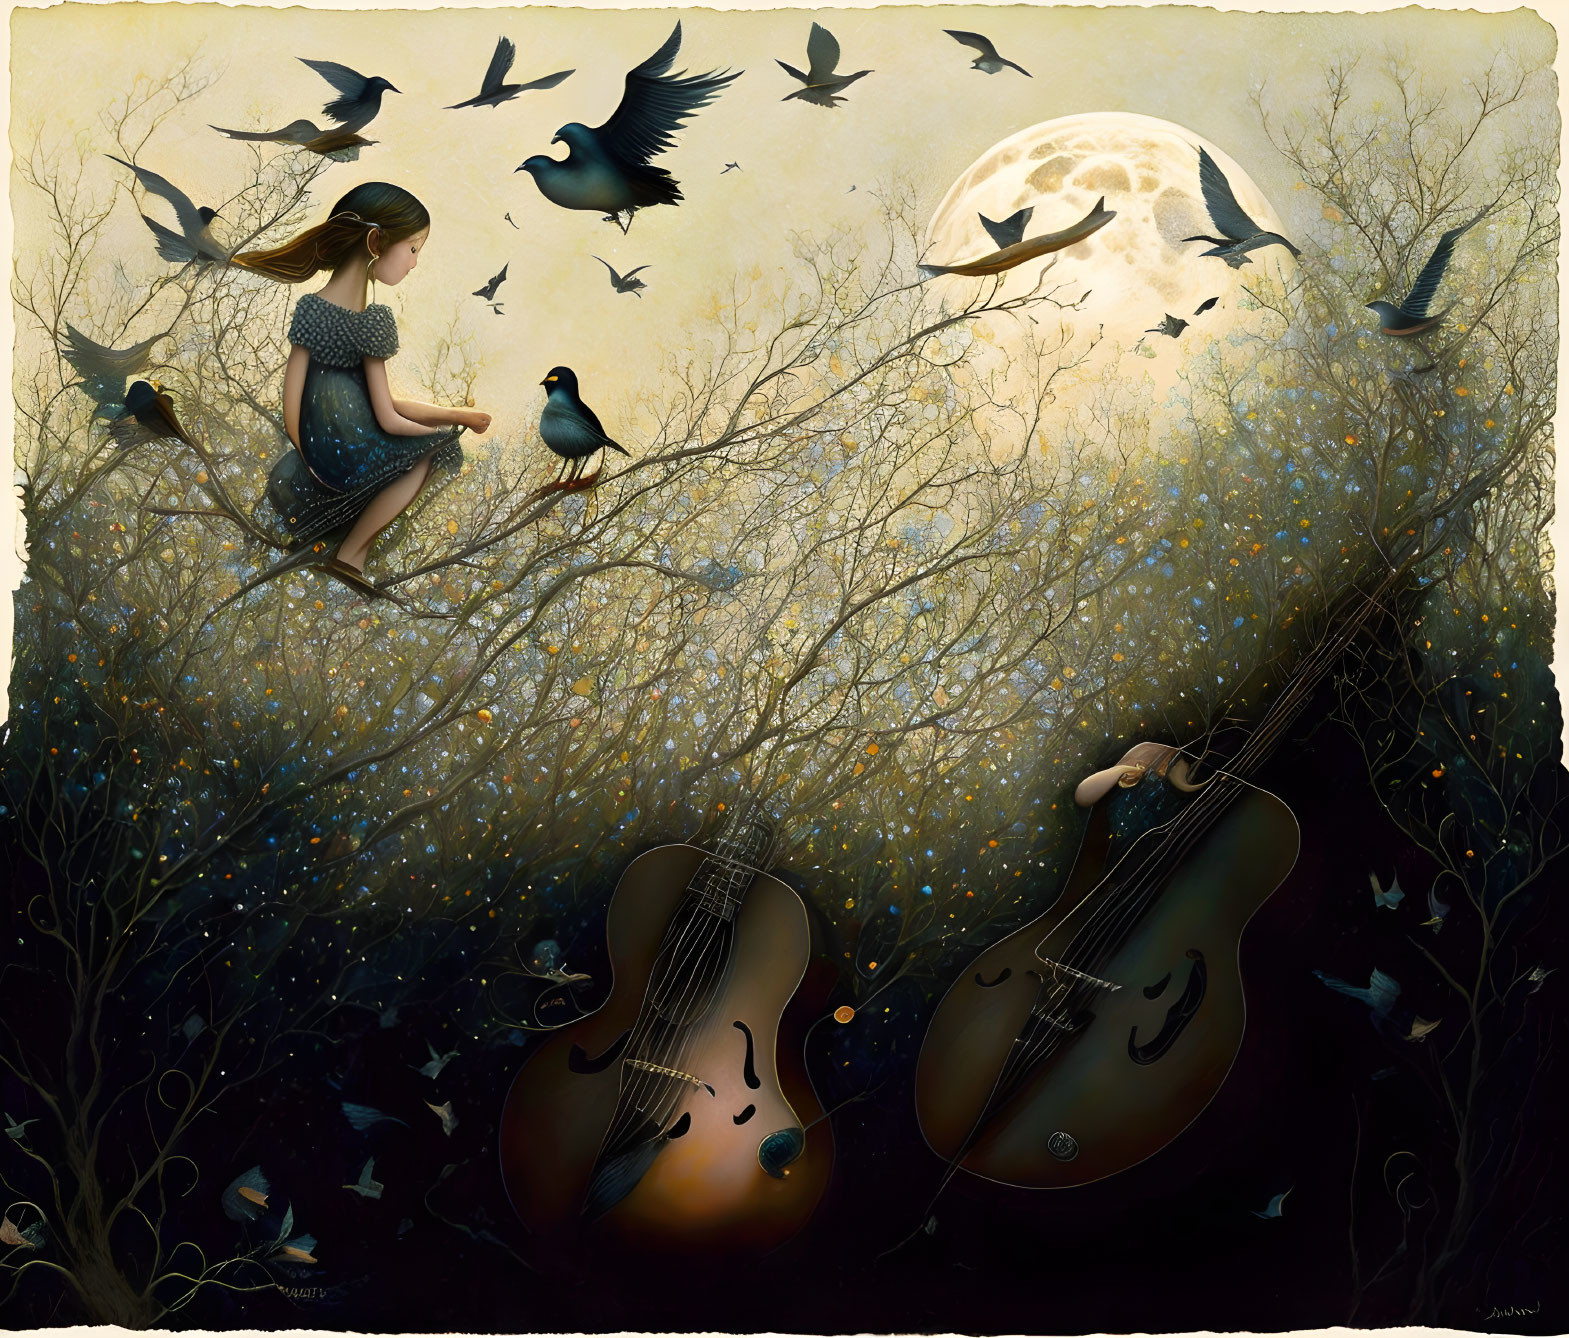 Whimsical artwork of girl on branch with musical instruments and birds